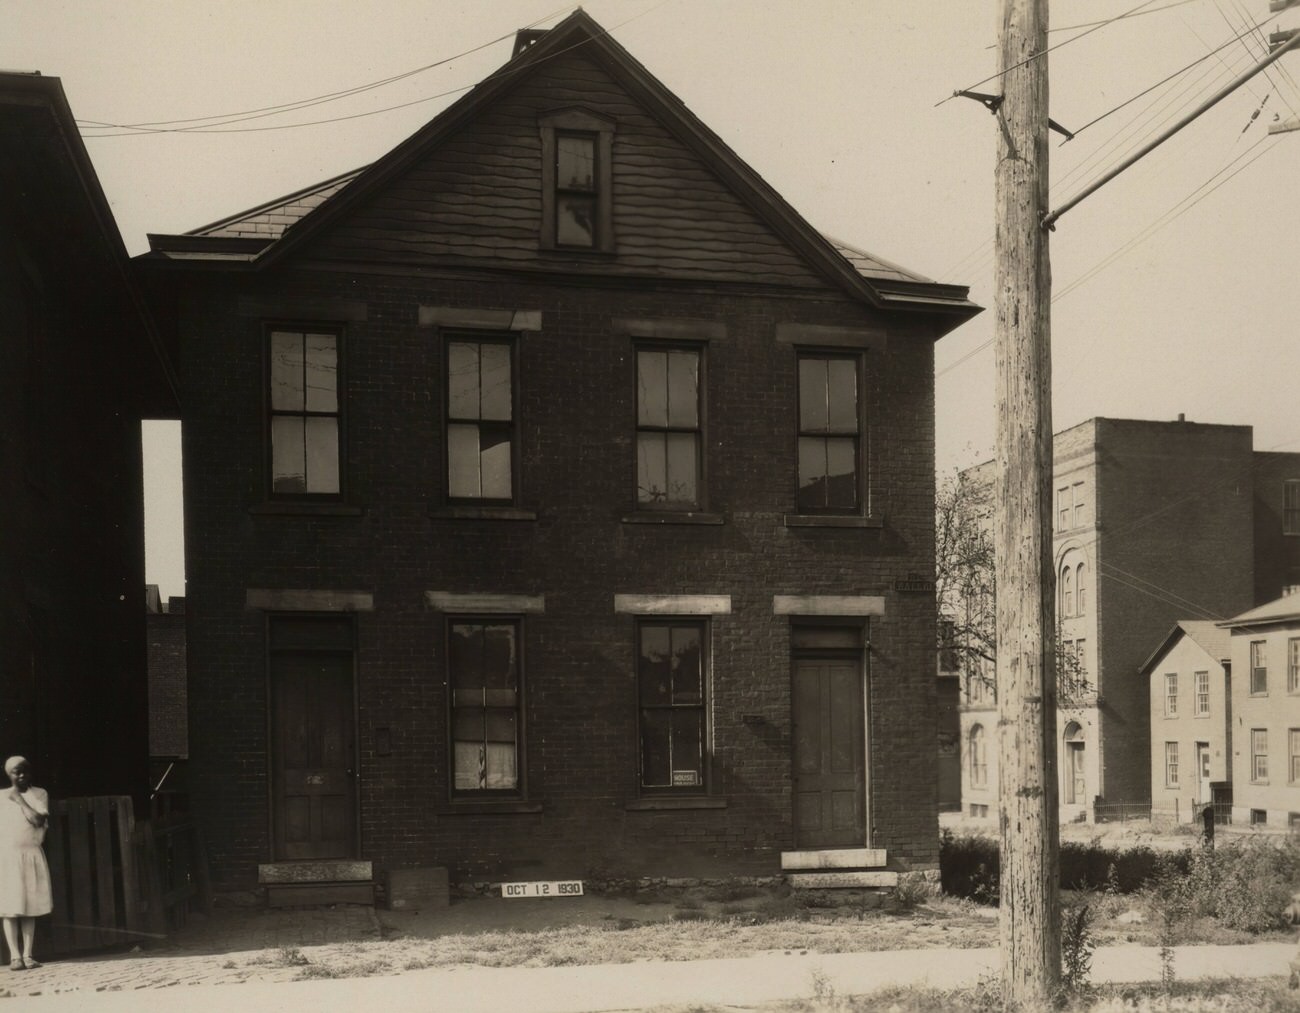 Brick double occupancy dwelling on Water and Randolph Streets, southwest corner, photograph from October 12, 1930.